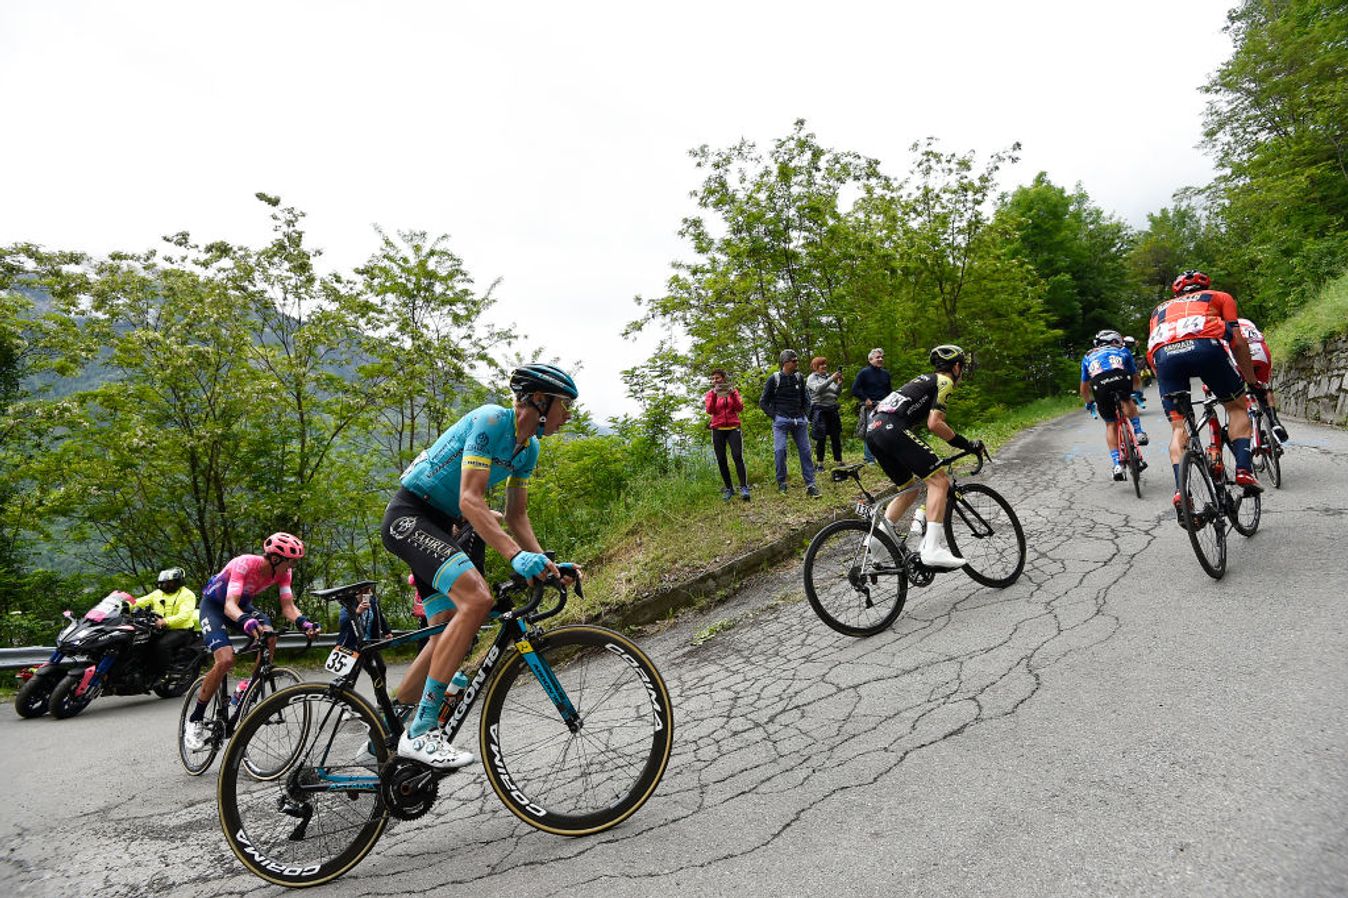 Riders tackle the viciously steep slopes of the Mortirolo during the 2019 Giro d'Italia